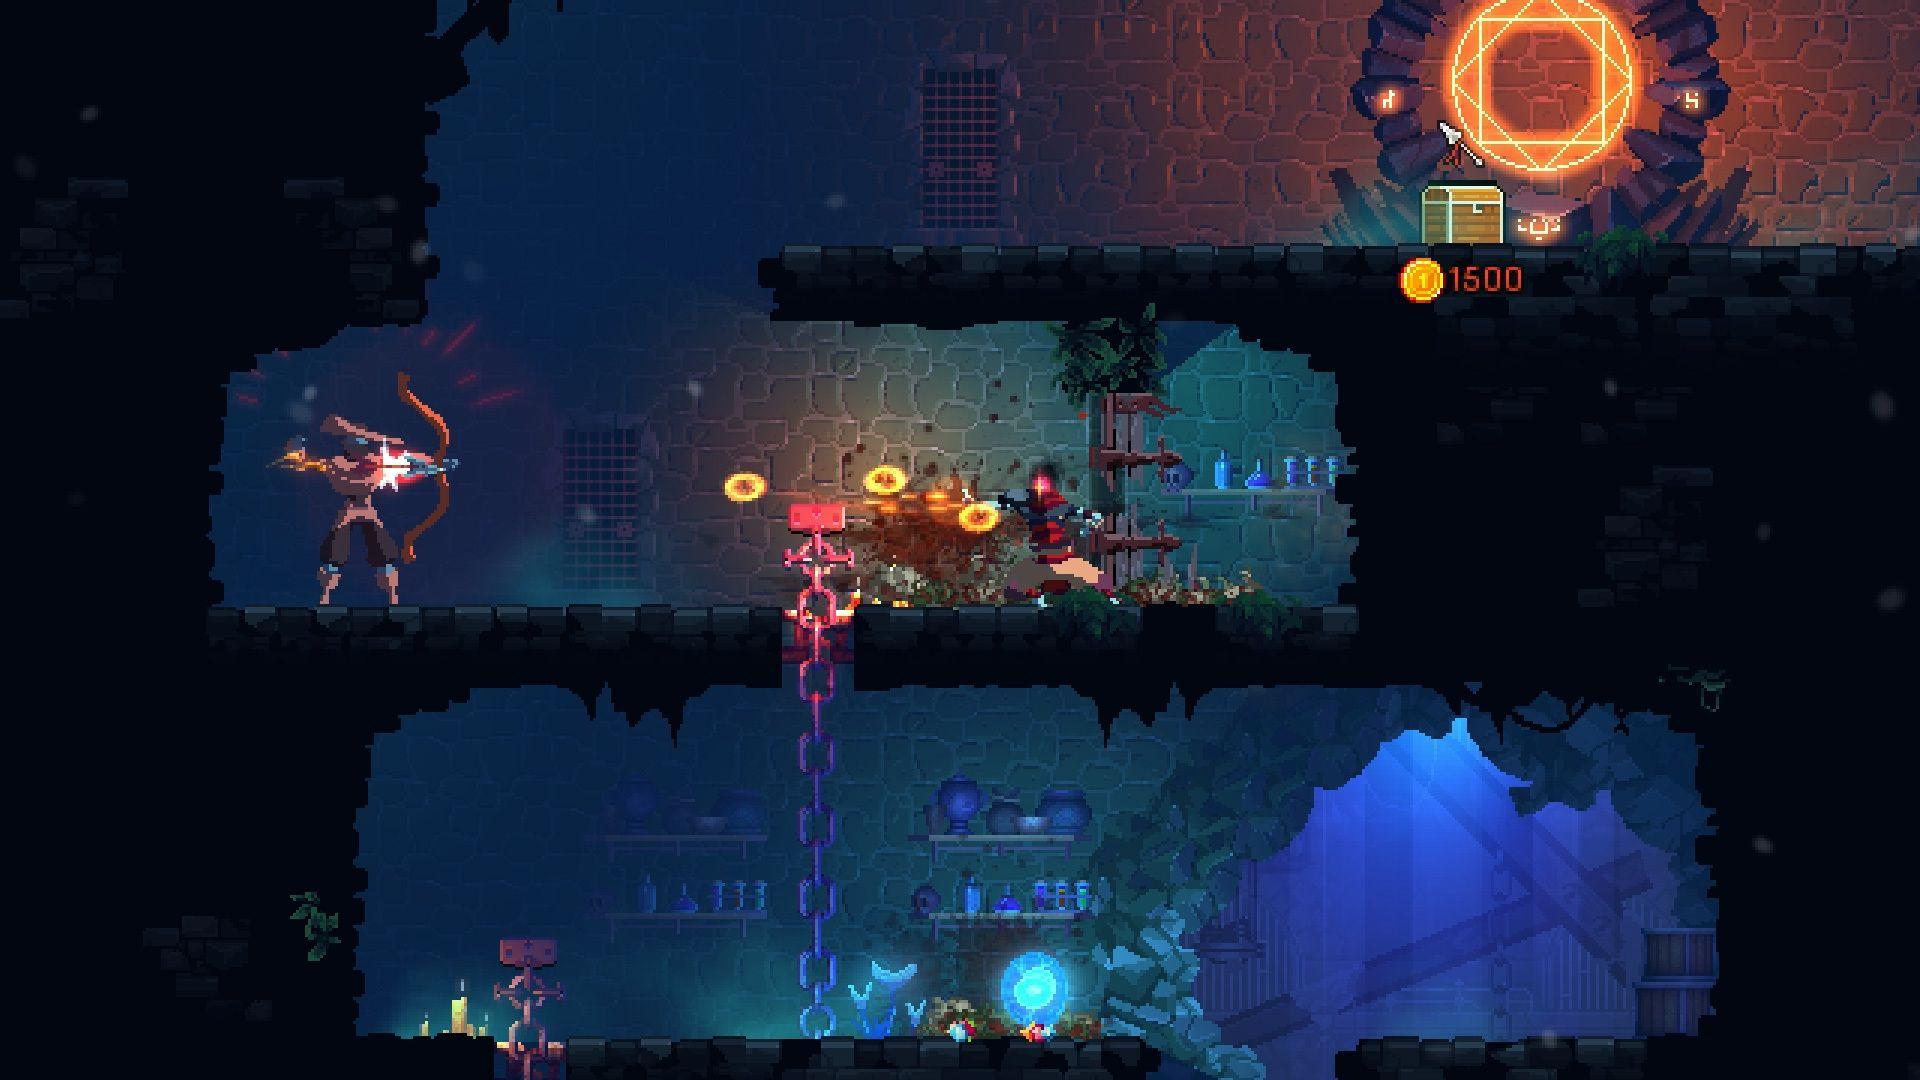 free Dead Cells for iphone download